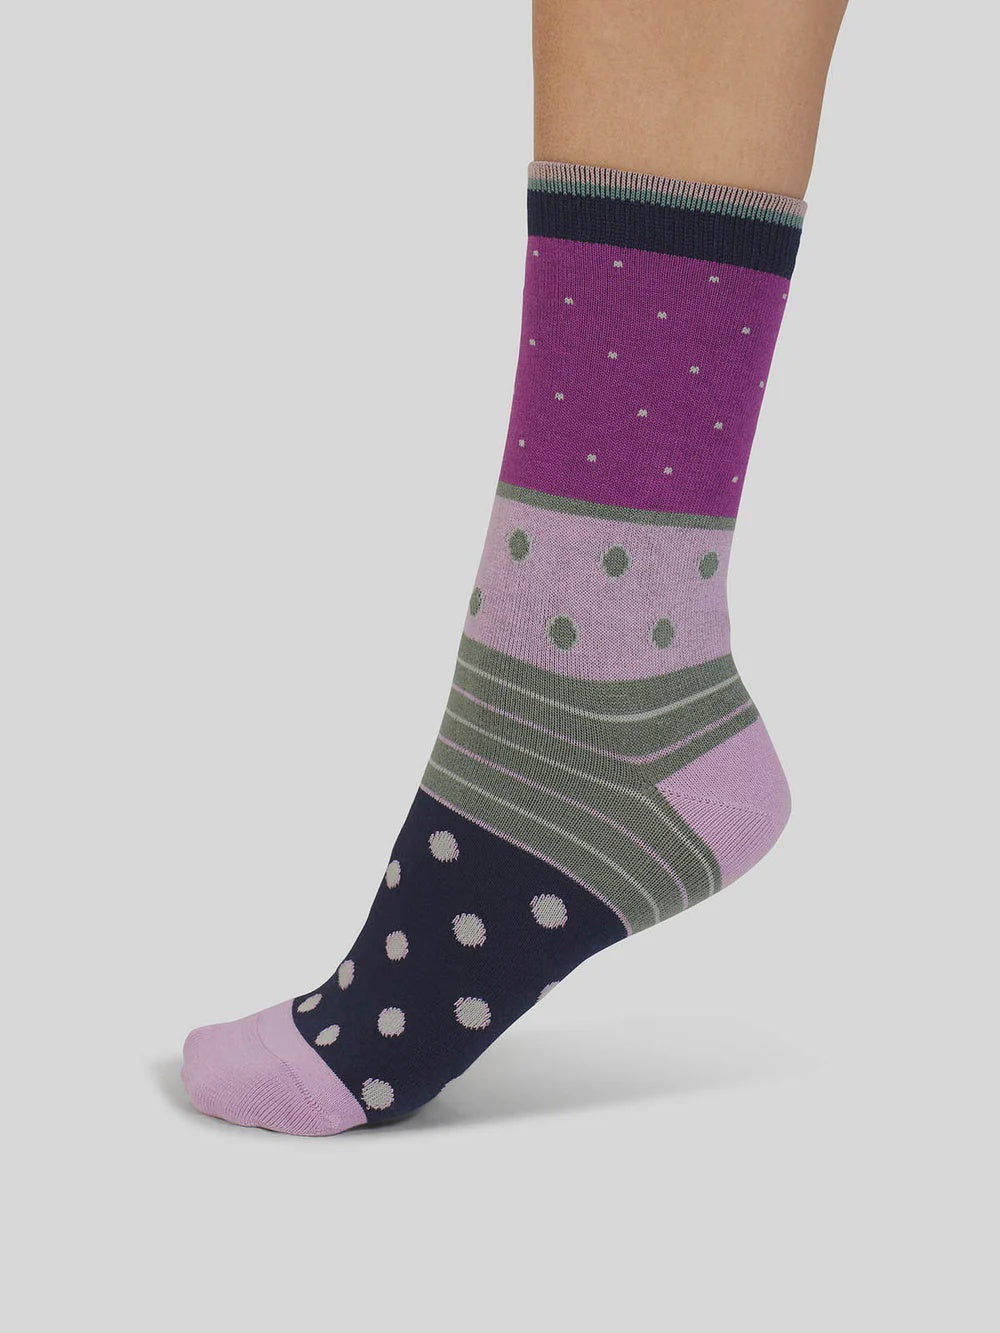 Thought Rondel Spot And Stripe Bamboo Ankle Socks Magenta Pink 4-7